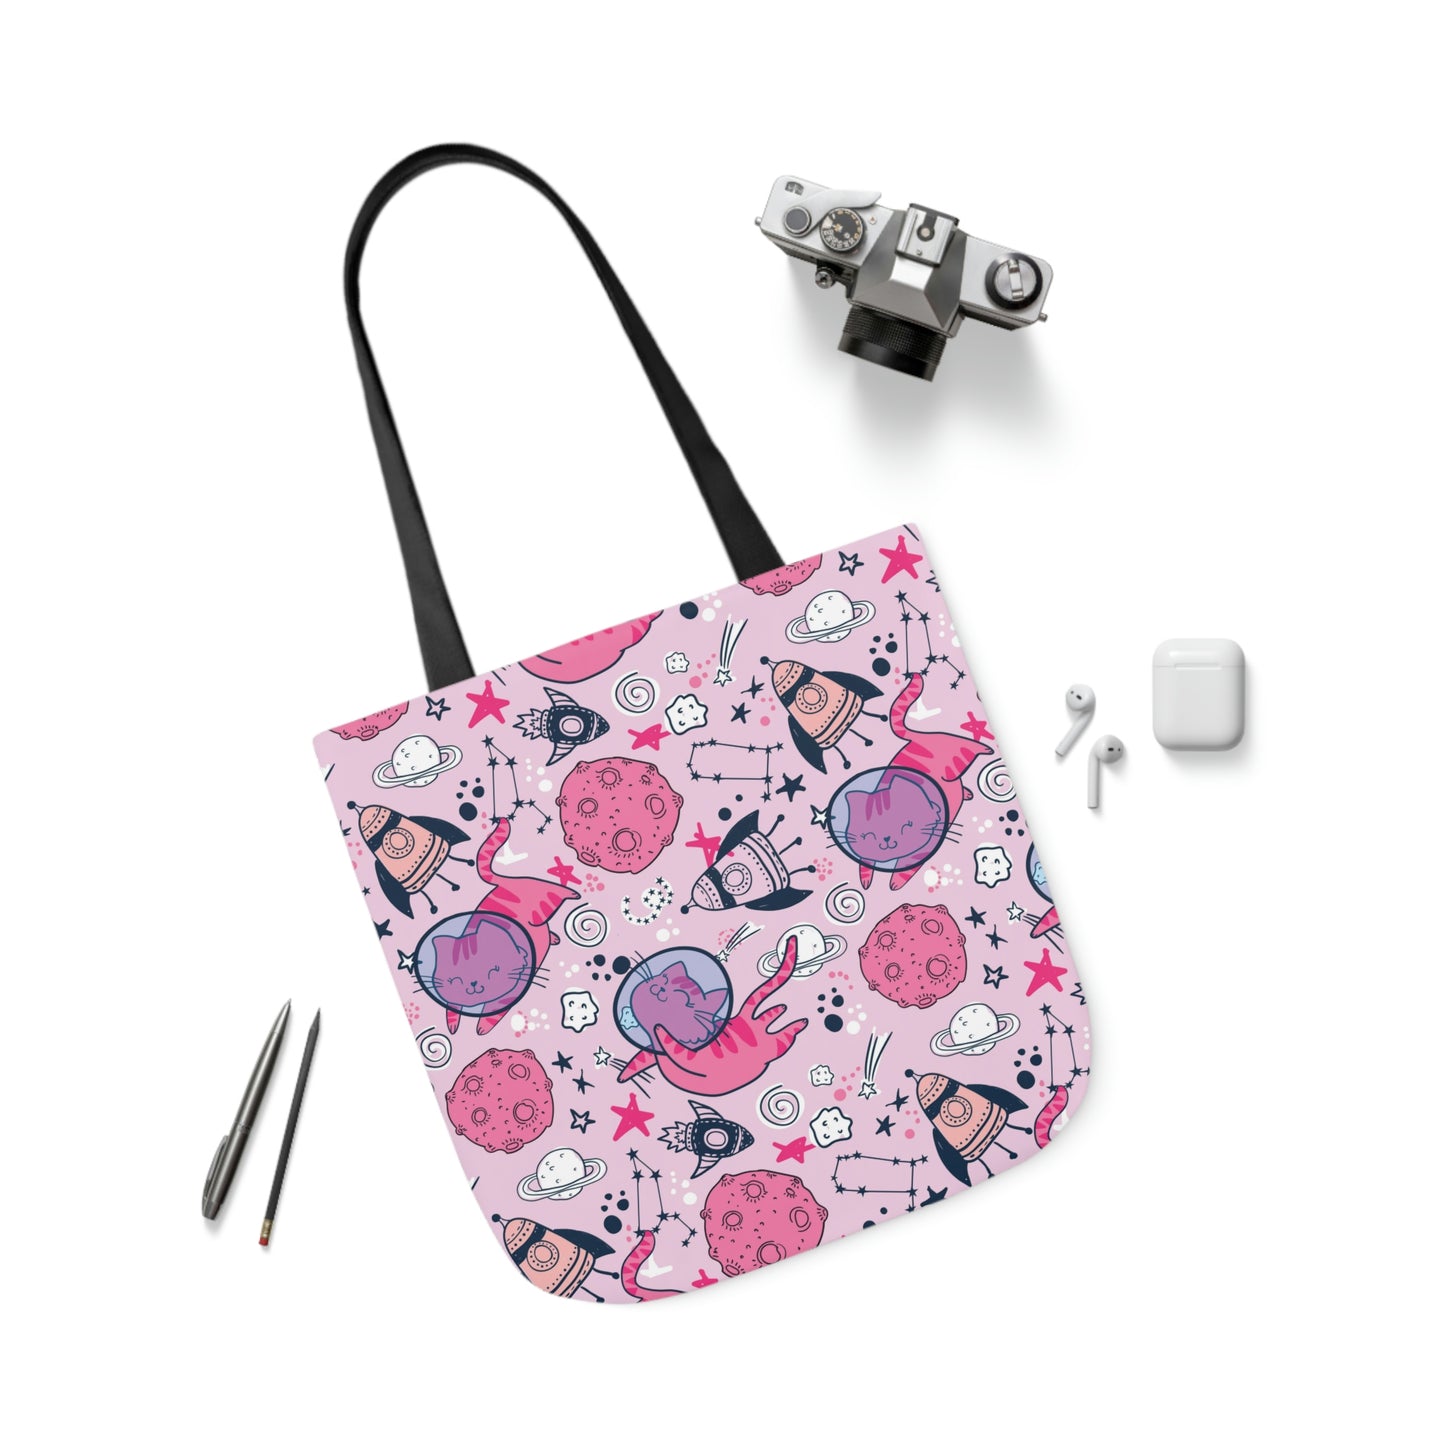 Space Cats Canvas Tote Bag